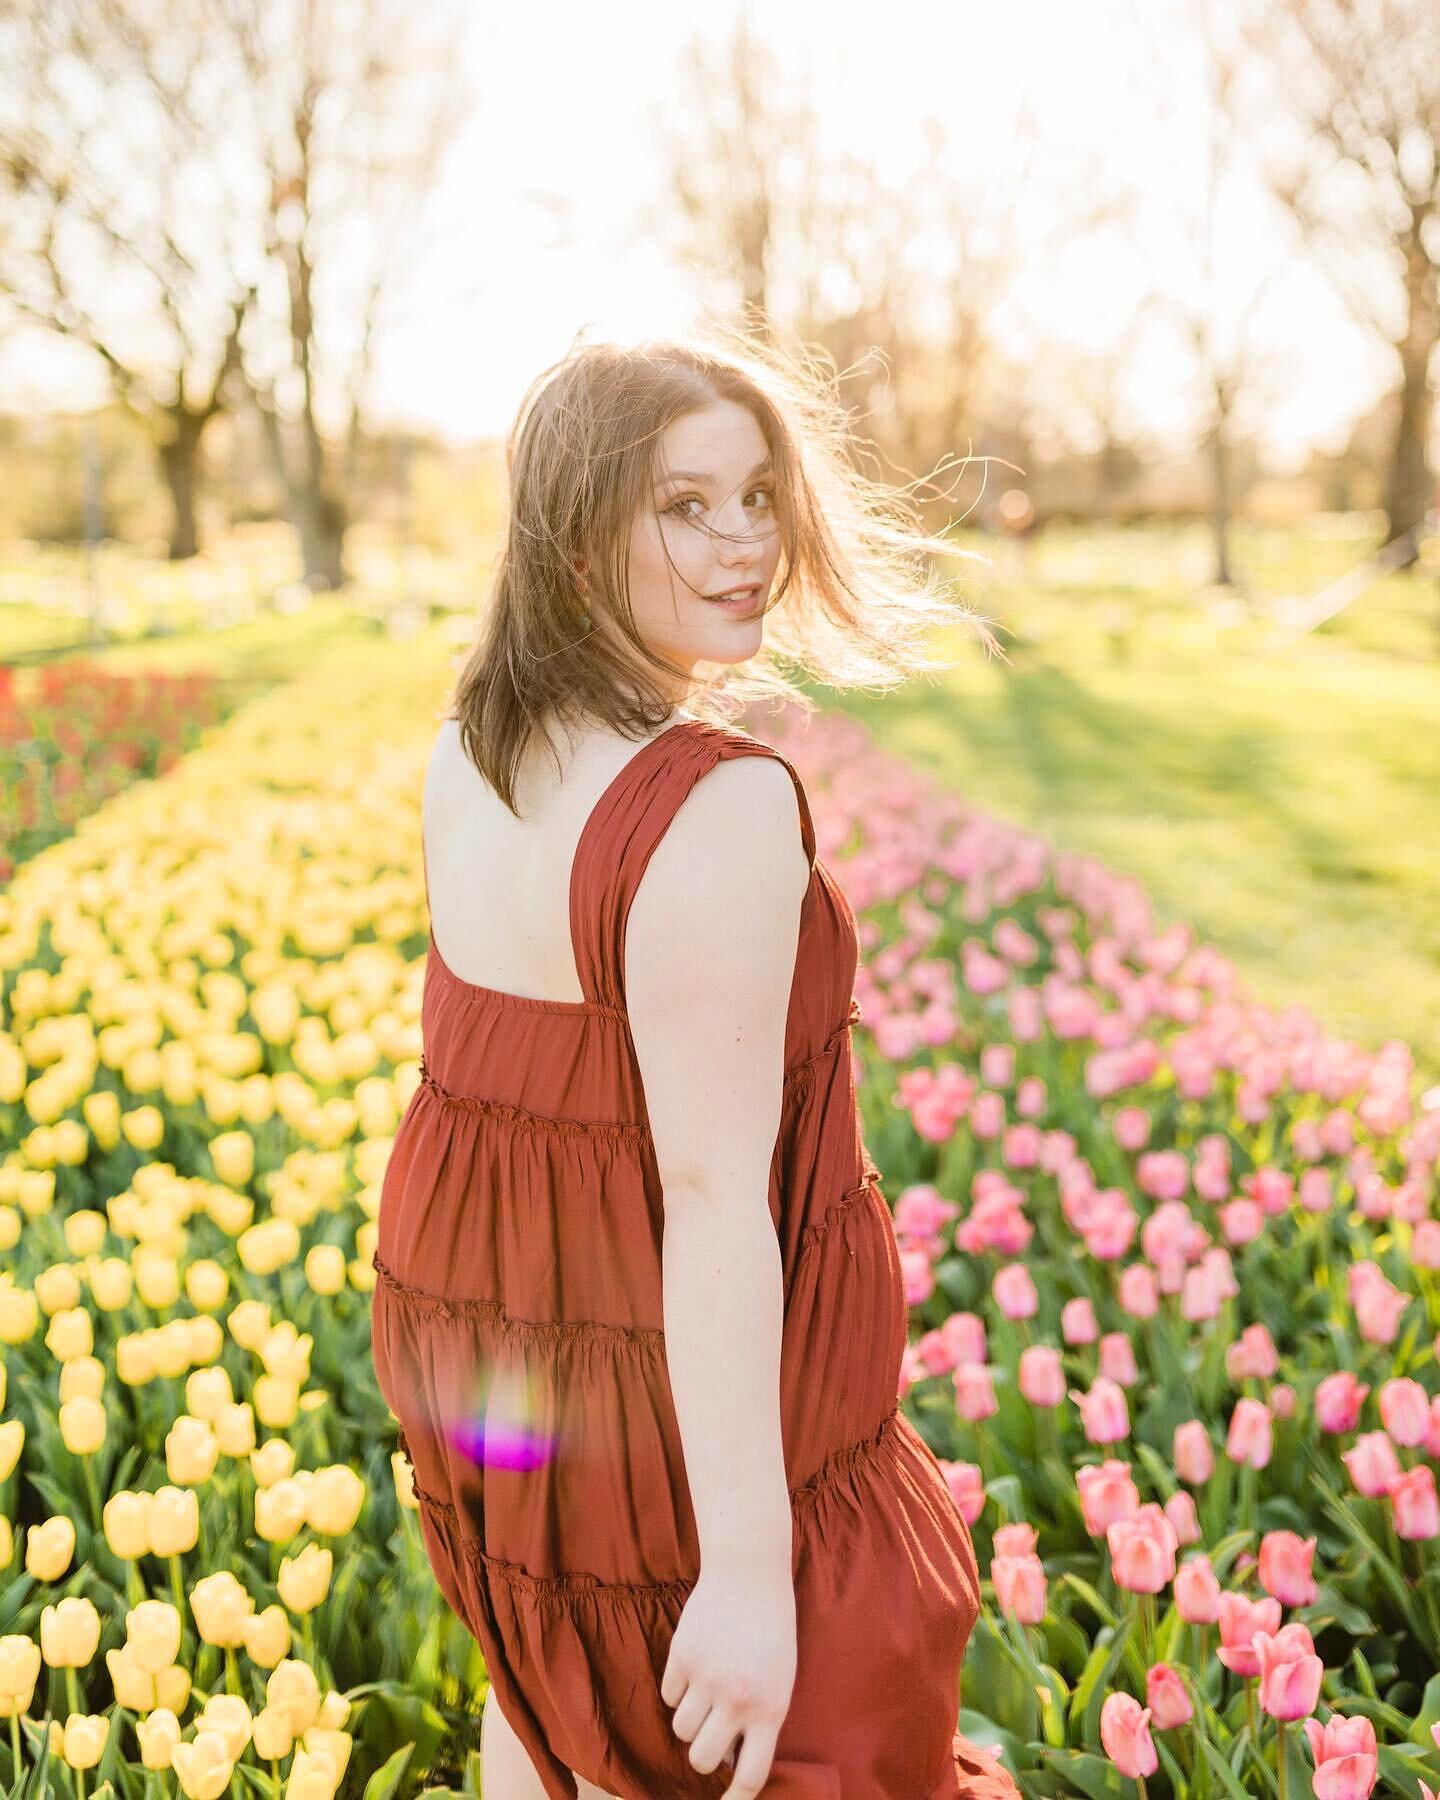 Under normal circumstances, hair in the face isn&rsquo;t what we go for. HOWEVER, when you&rsquo;re frolicking through a tulip field at Golden Hour, and everything feels flowy and beautiful and free&hellip; the wild &amp; windswept hair can stay. You